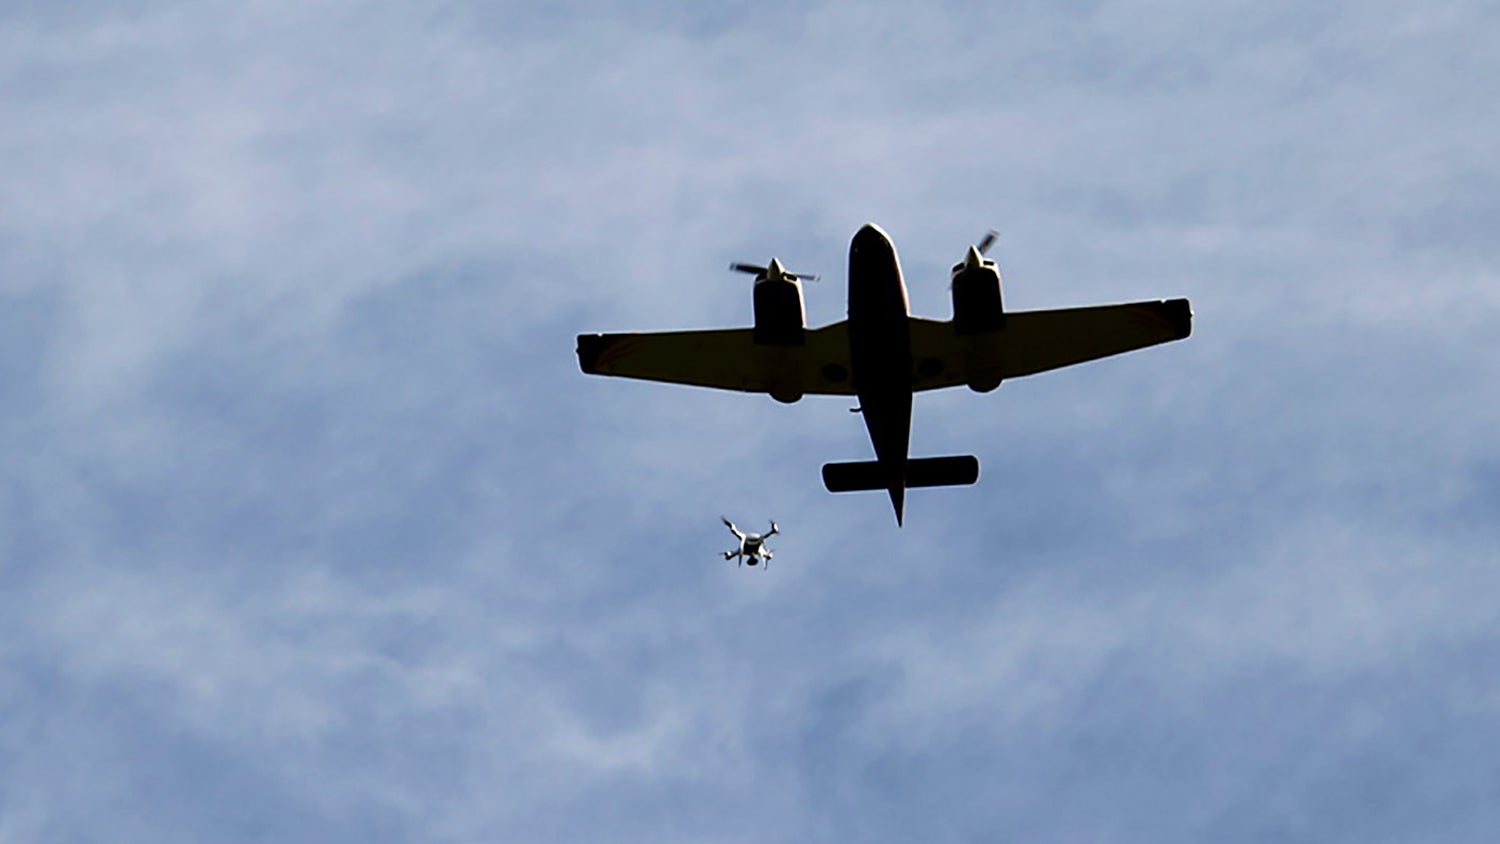 As Drone Encounters Rise, Study Shows Visibility Concerns